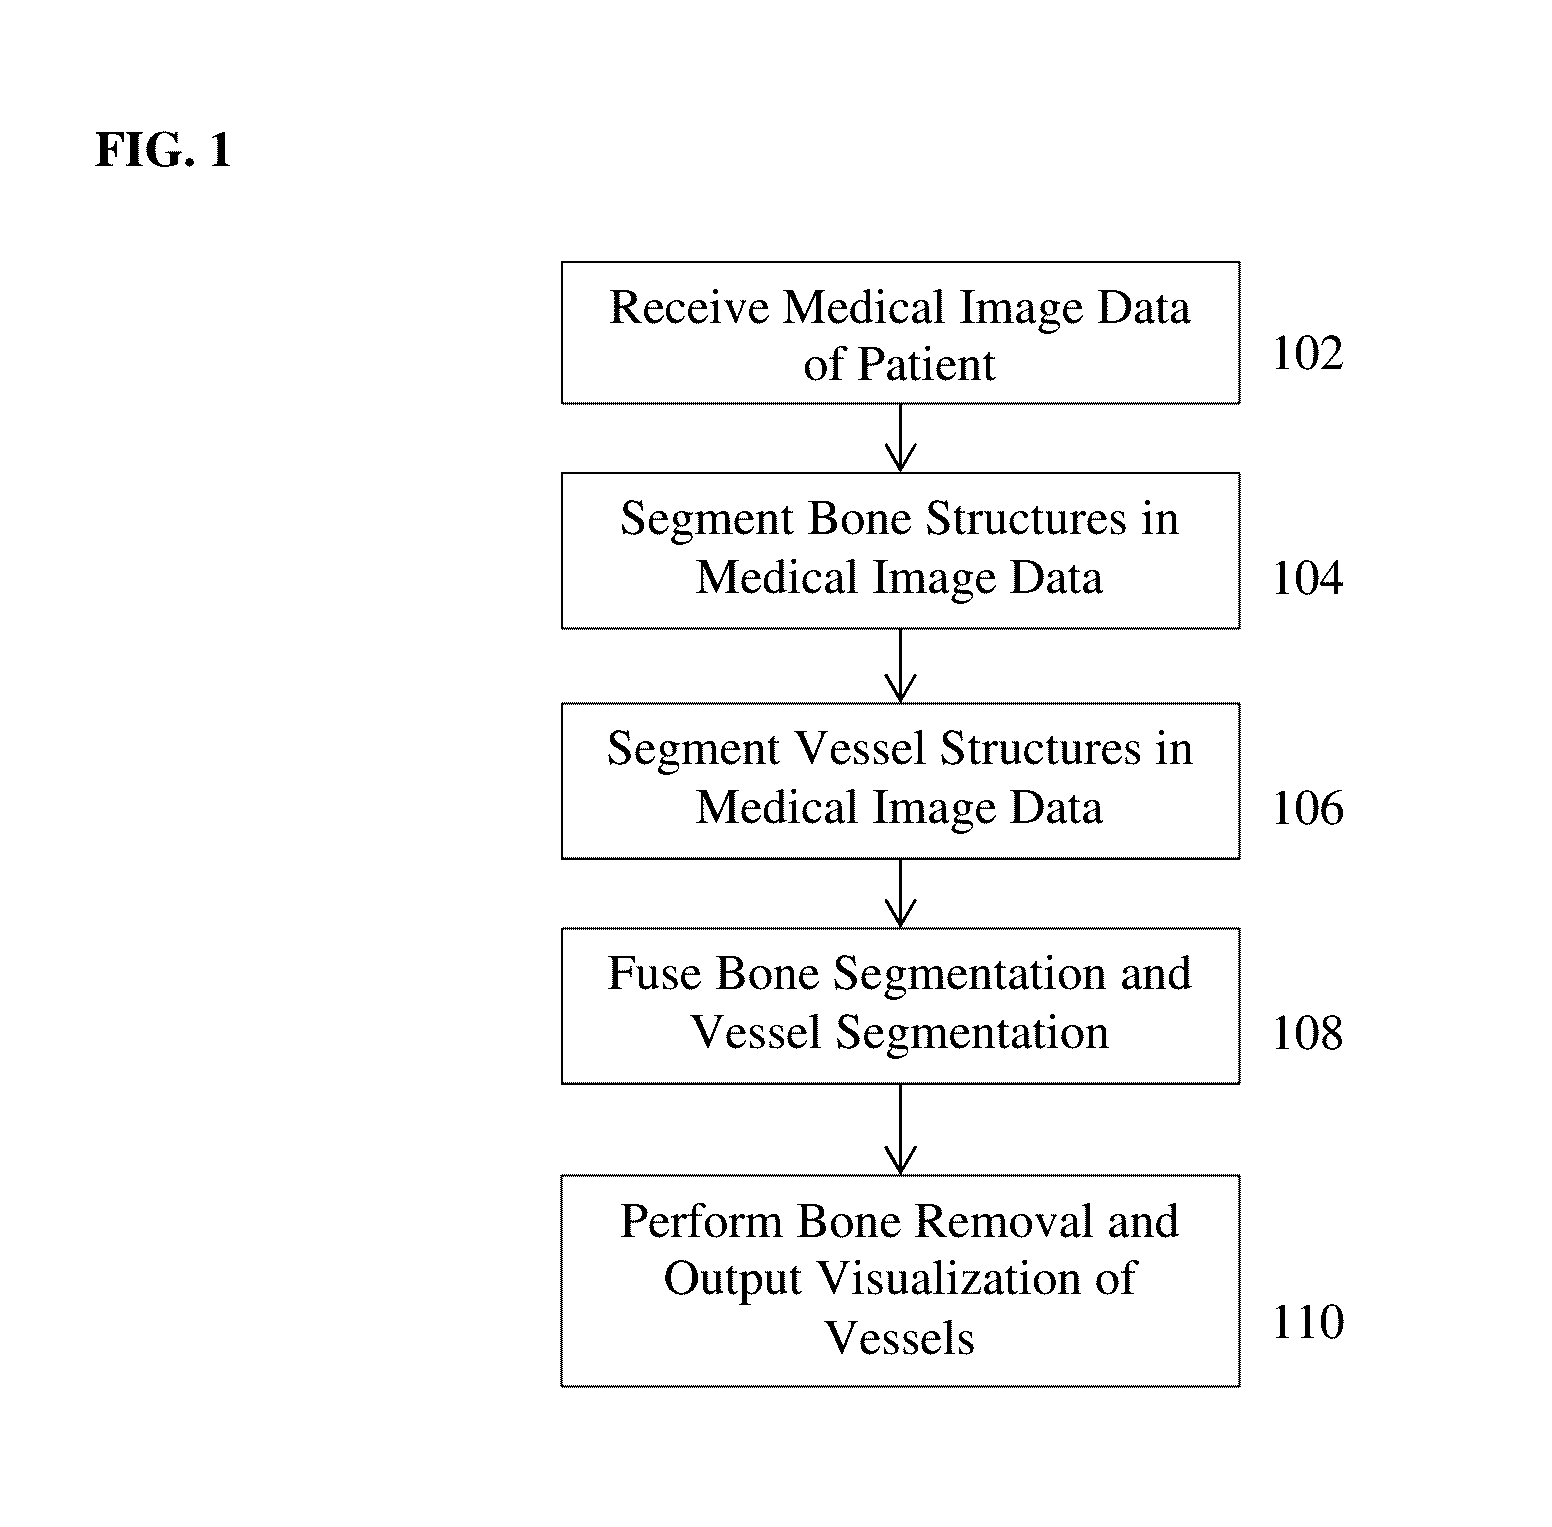 Method and System for Whole Body Bone Removal and Vascular Visualization in Medical Image Data